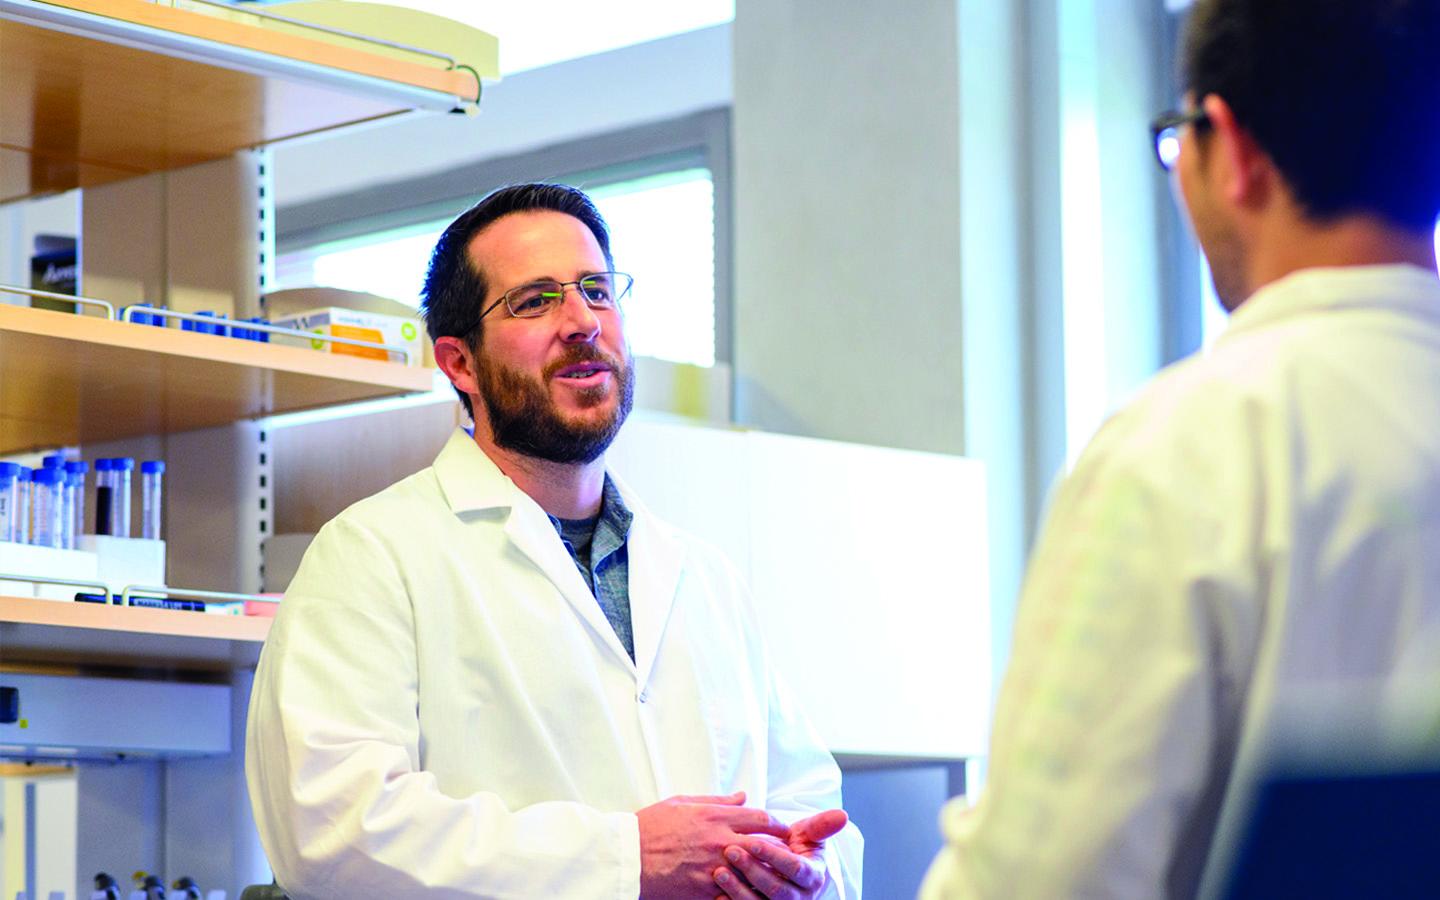 Jason McLelland in his white coat in a lab